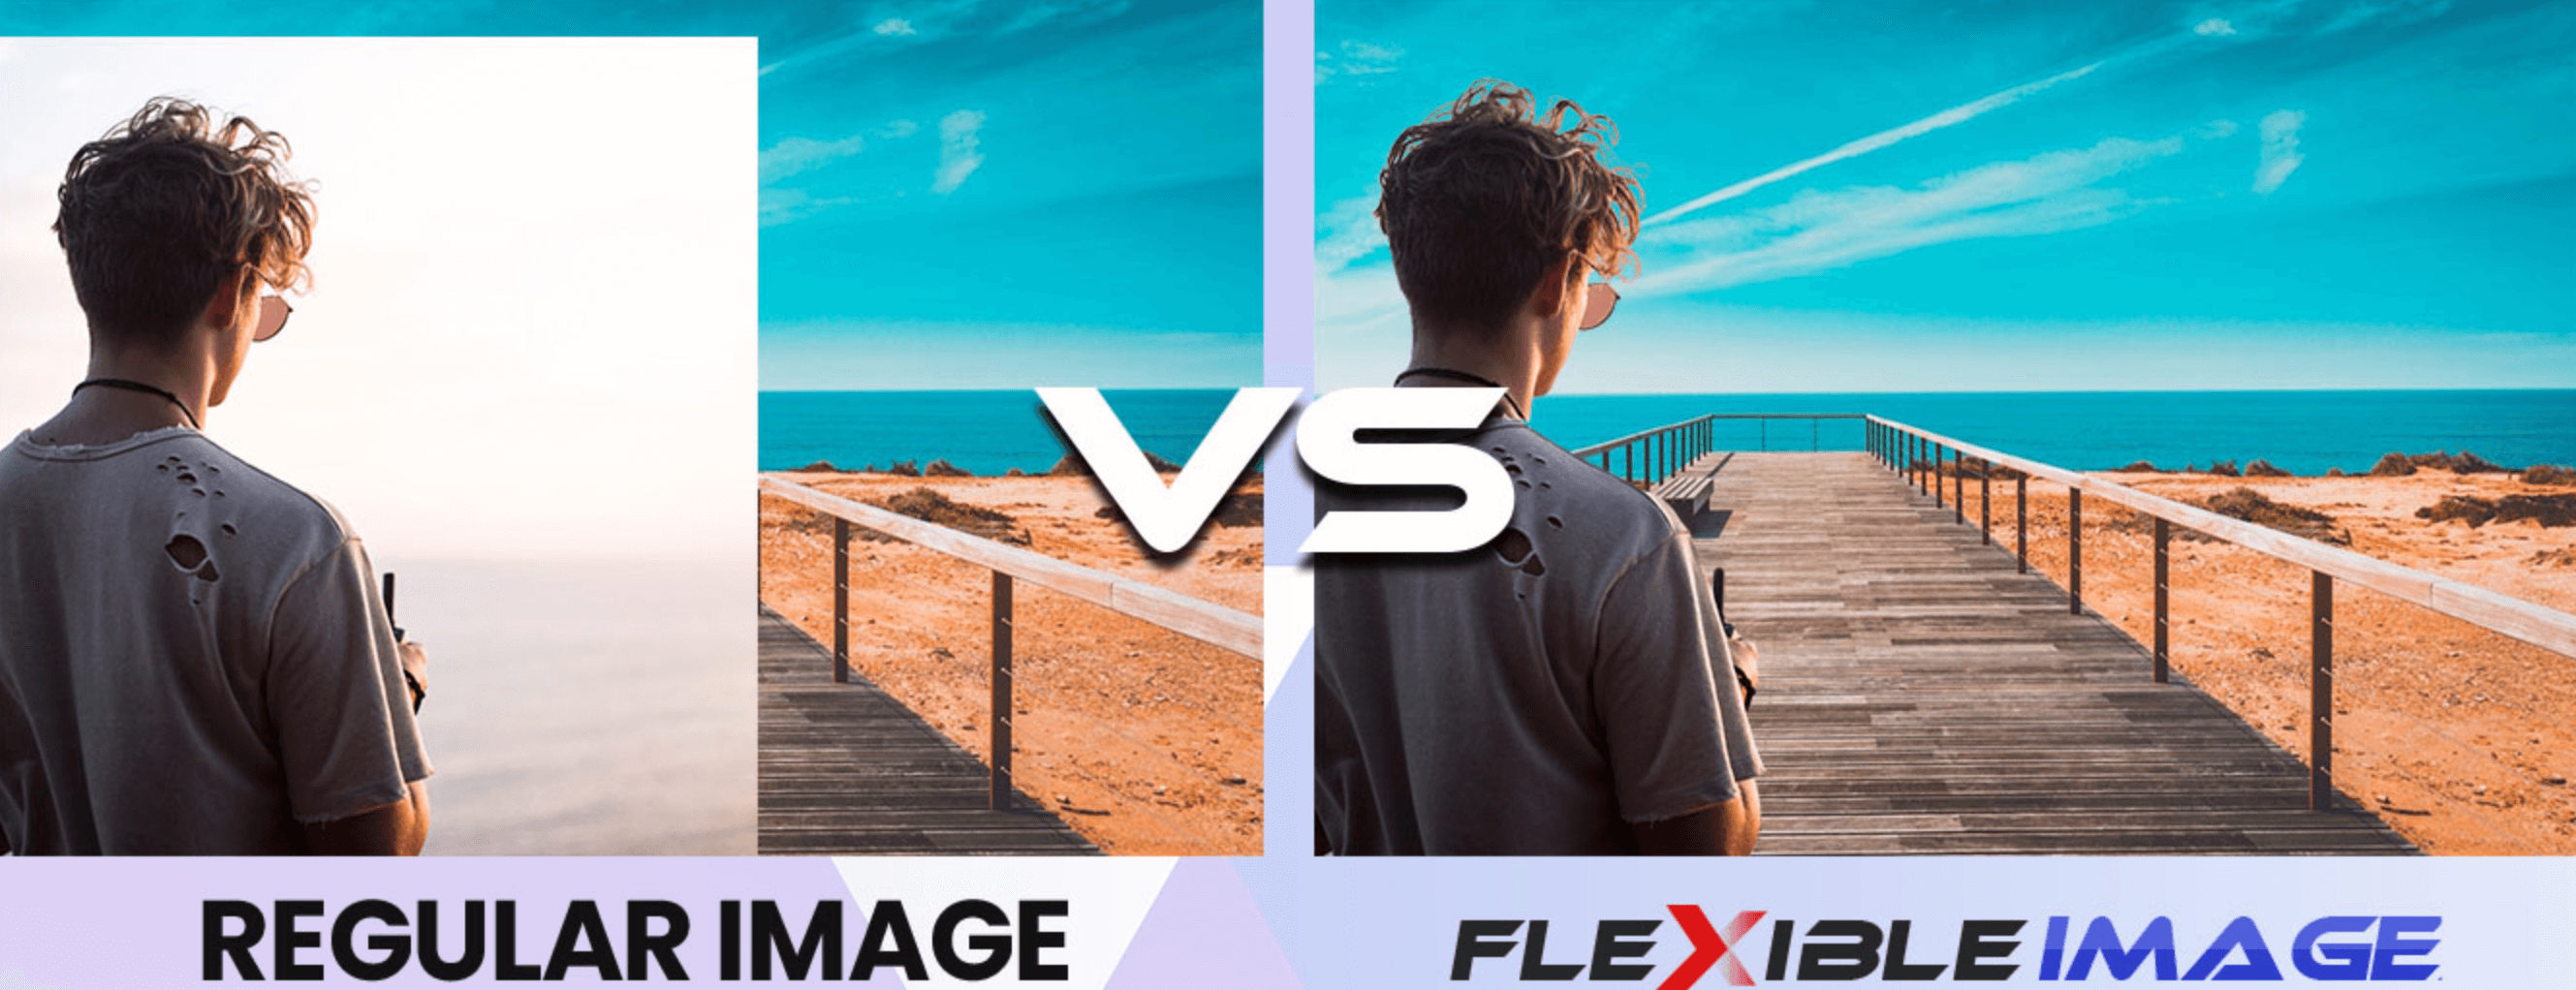 Flexible Images Club Review